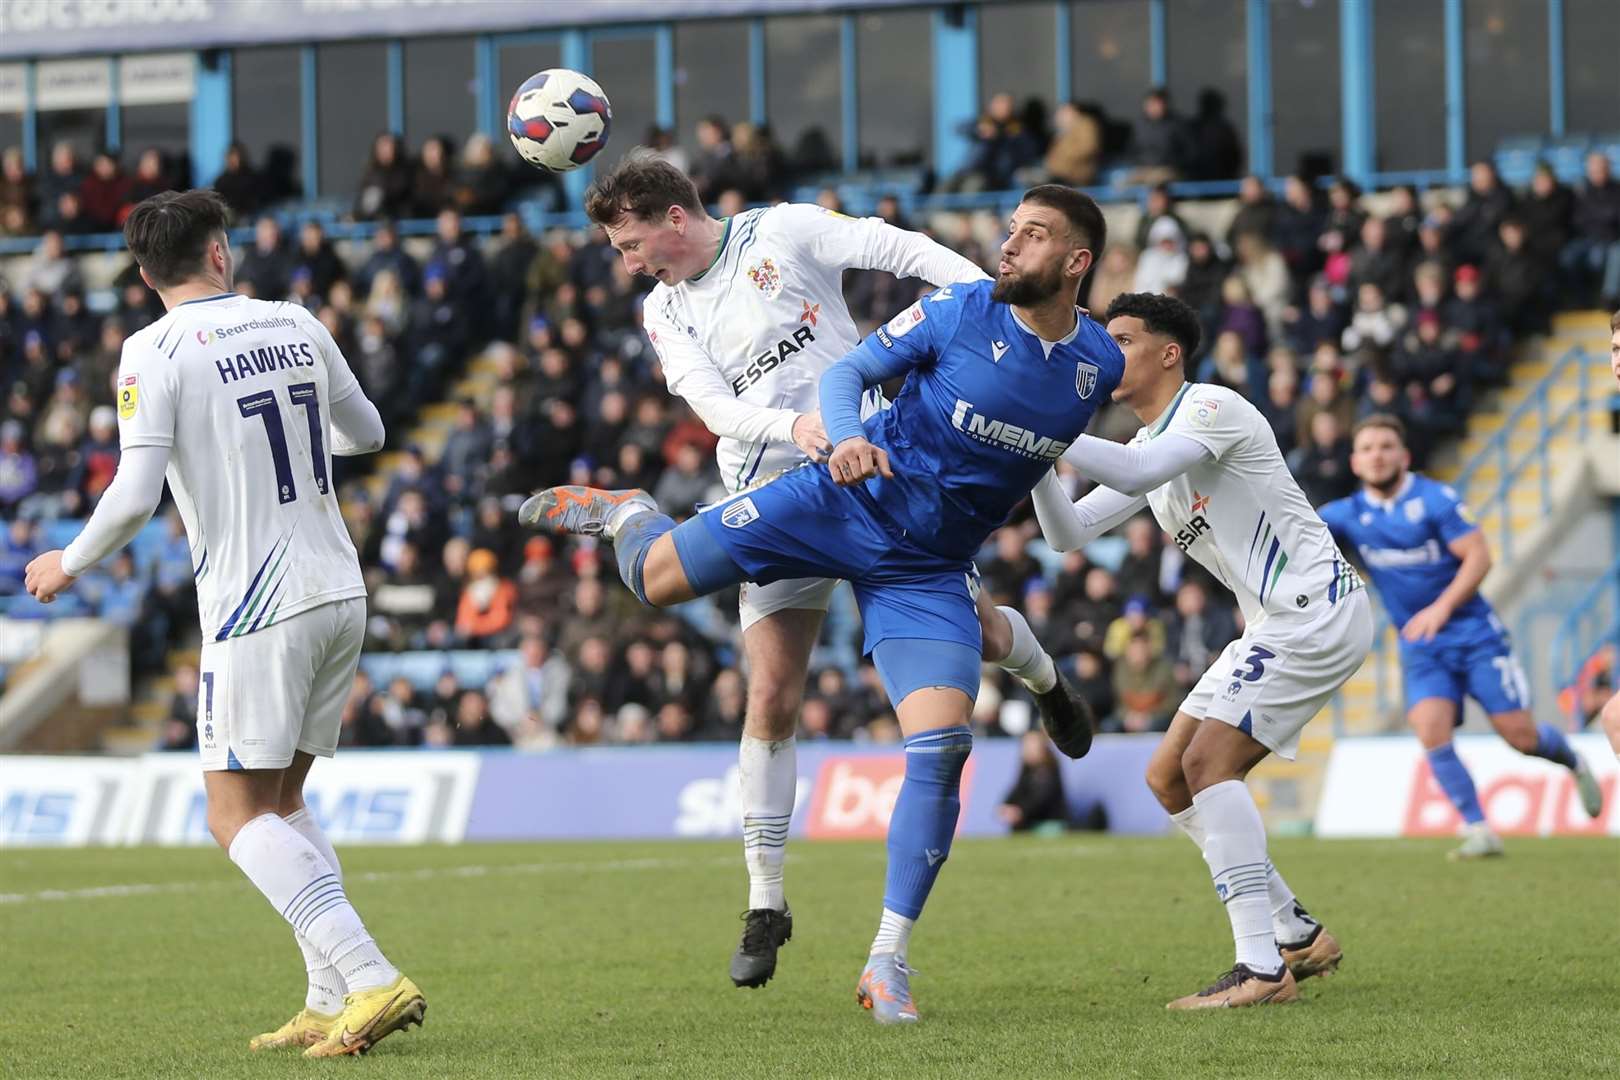 Max Ehmer challenges for the ball in Gillingham win over Tranmere (62928480)